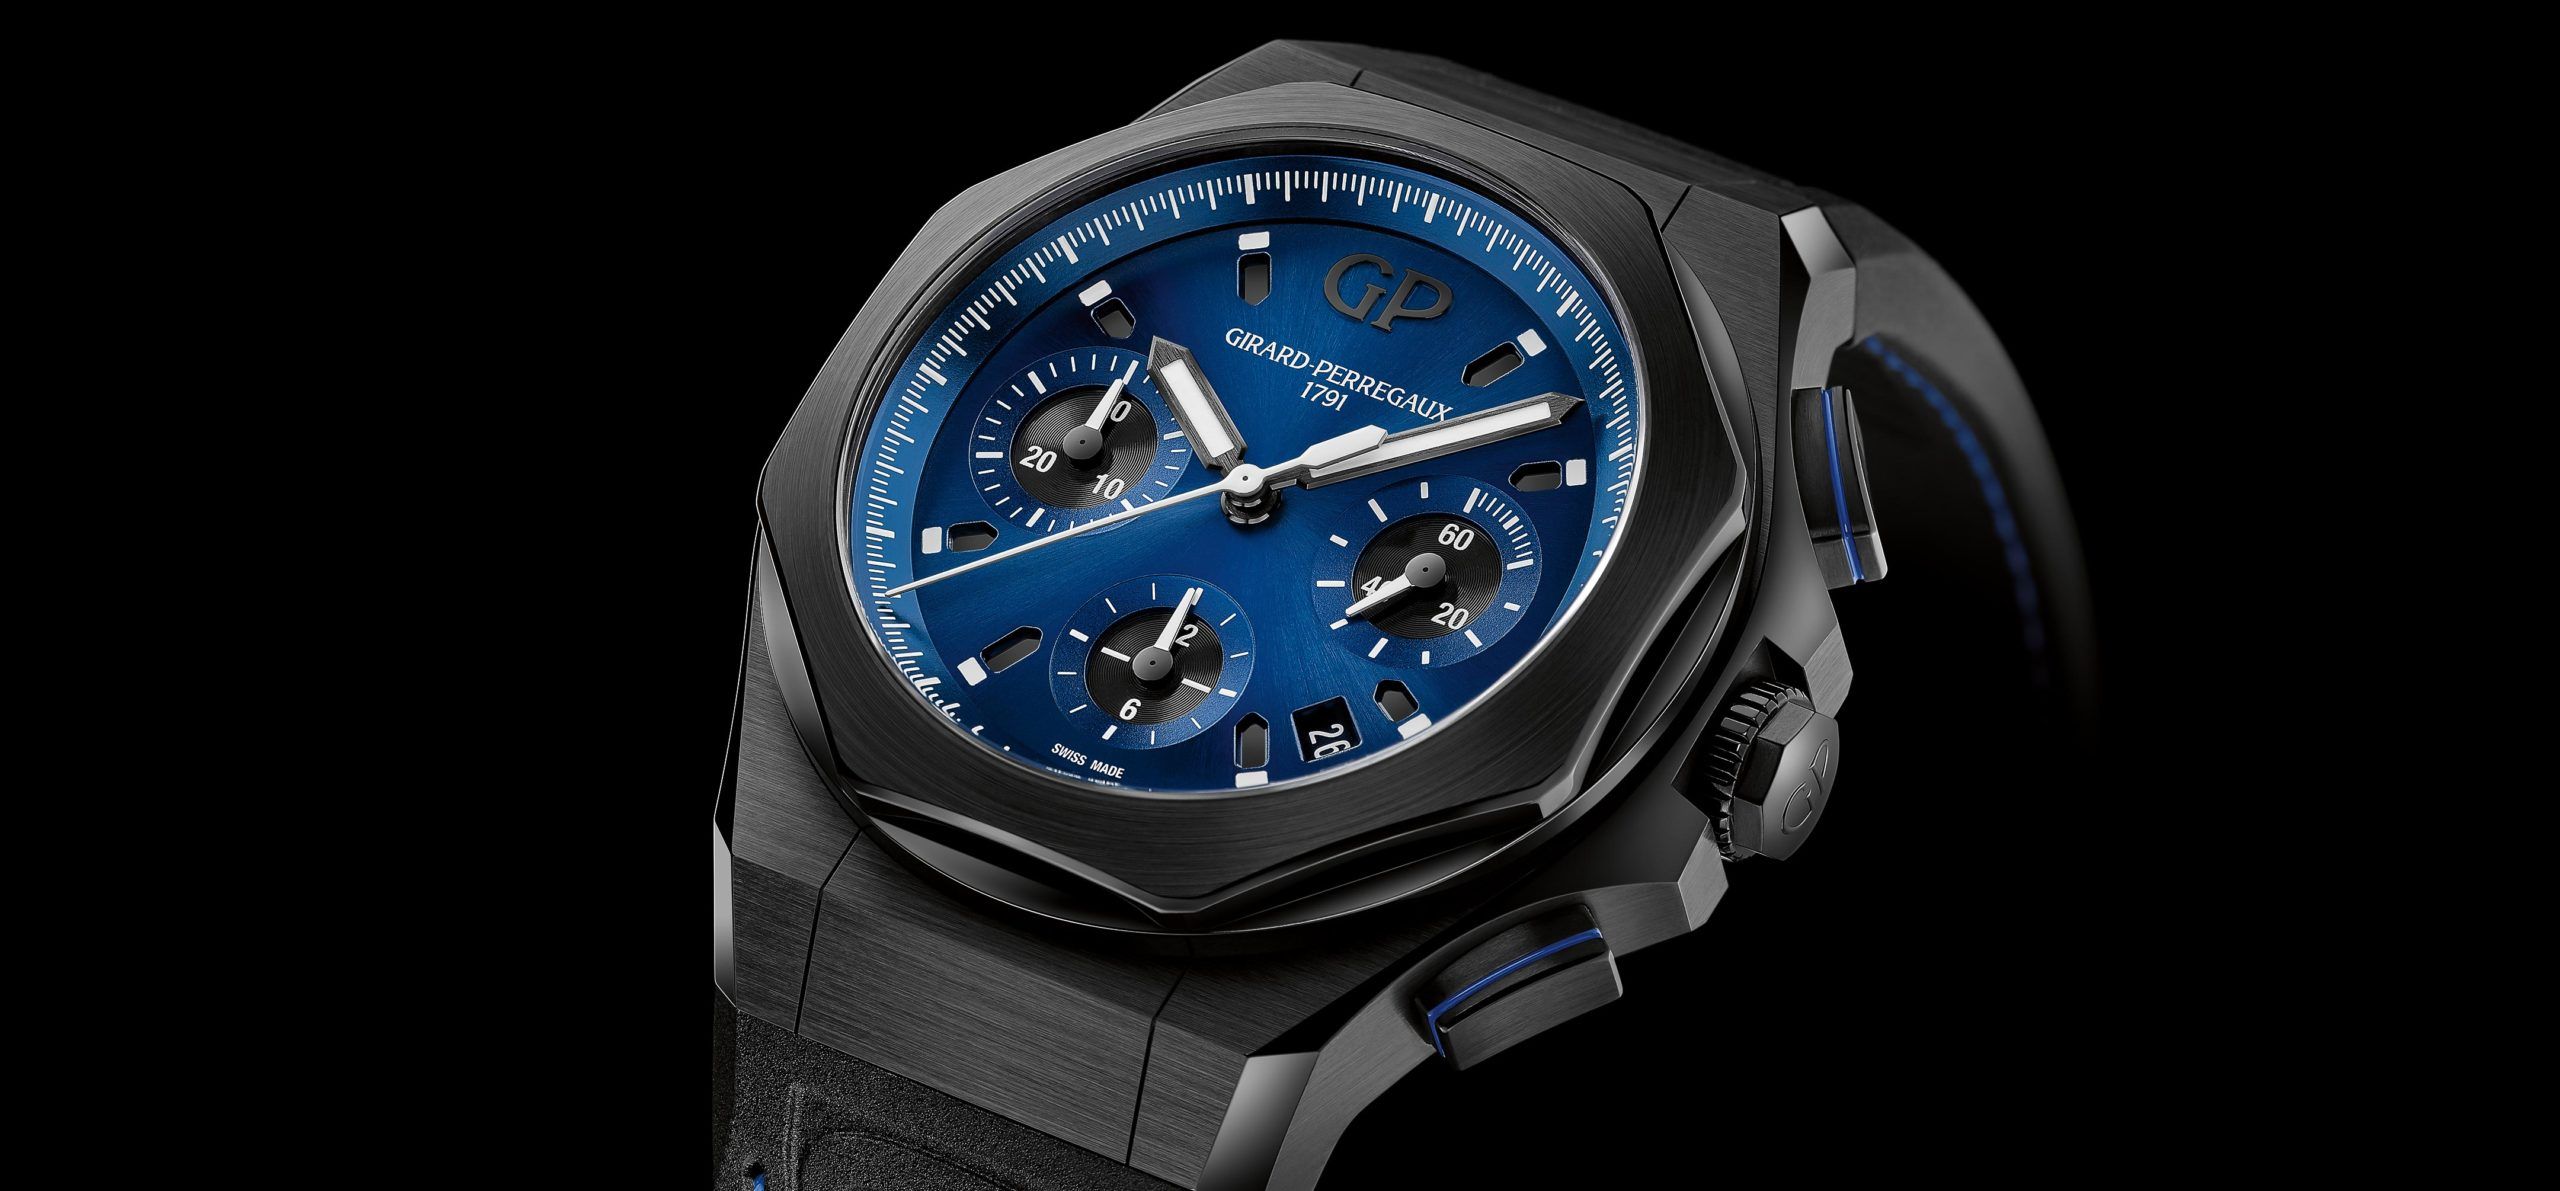 Bold Spectrum: Top Watches For Big Wrists